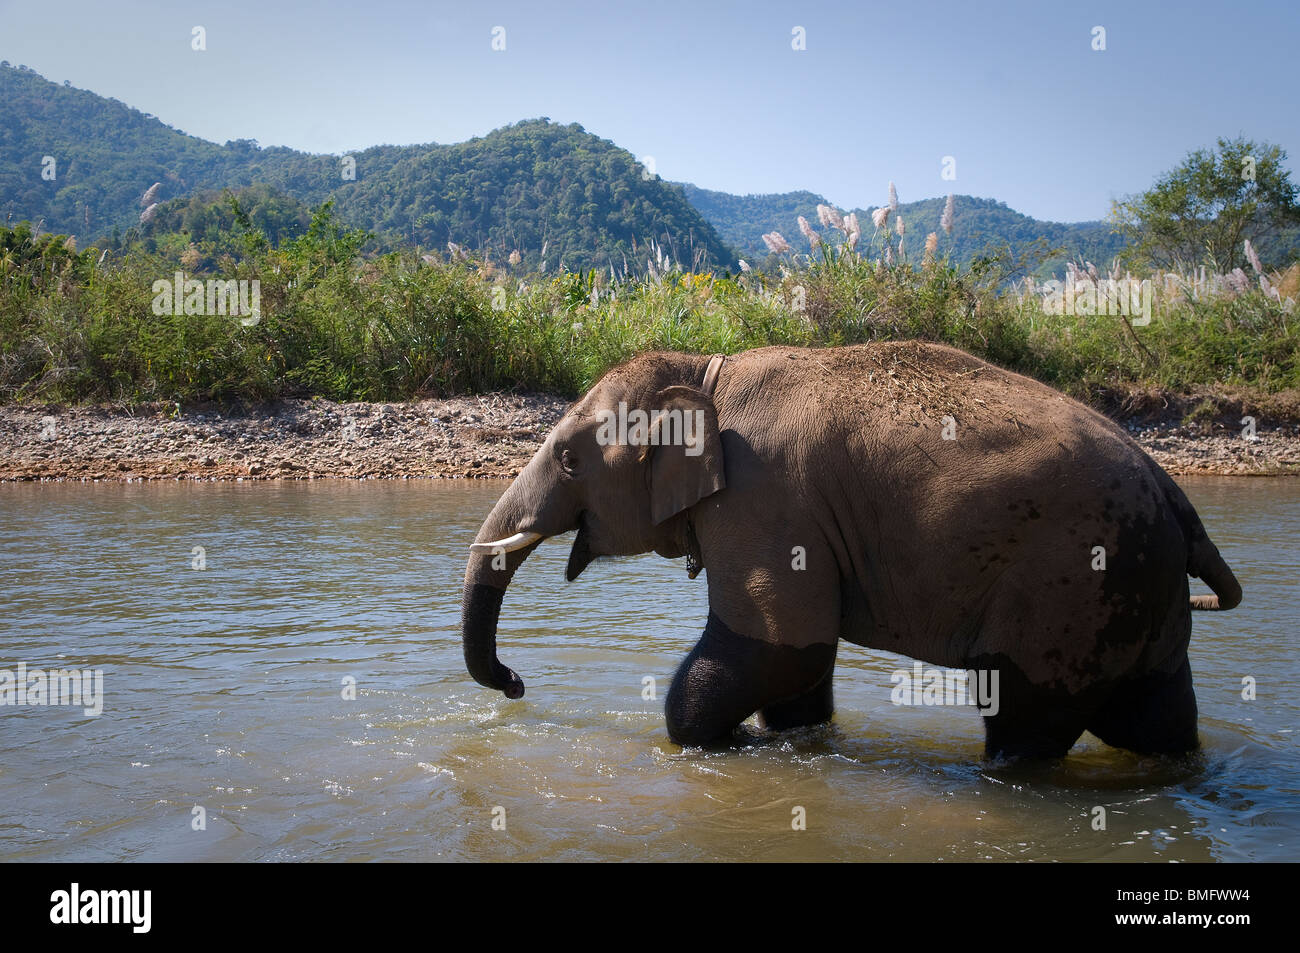 THAILAND, NORTH OF CHIANG MAI: Lek's elephant farm for rescued elephants, a place for alternative elephant tourism. Stock Photo